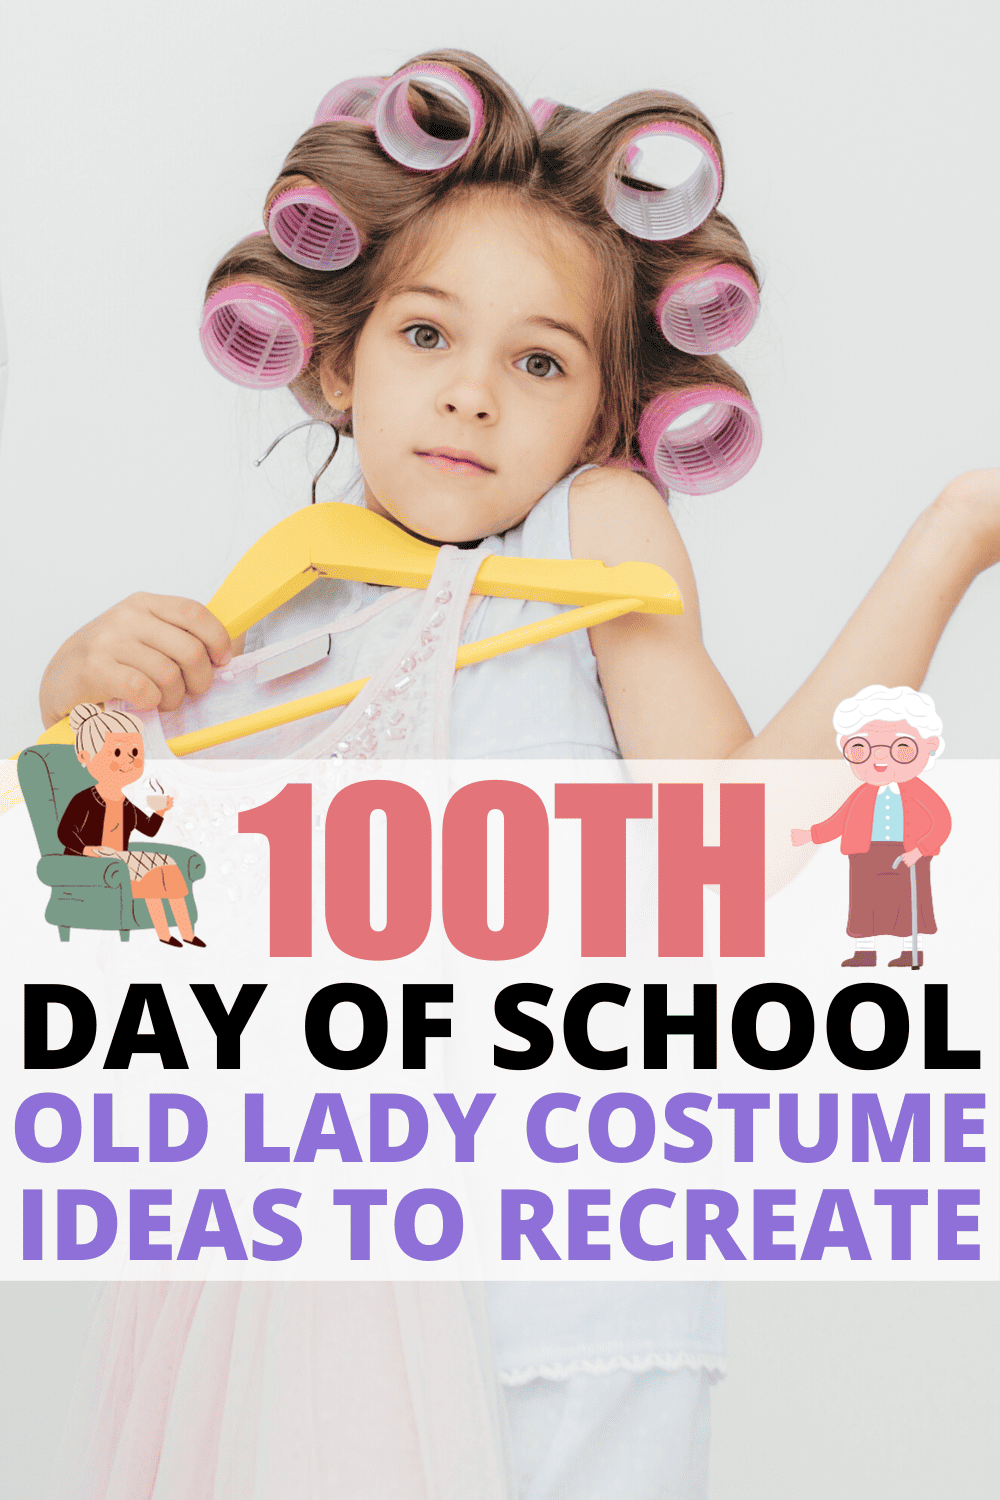 12+ Adorable 100th Day of School Old Lady Costume Ideas To Recreate ...